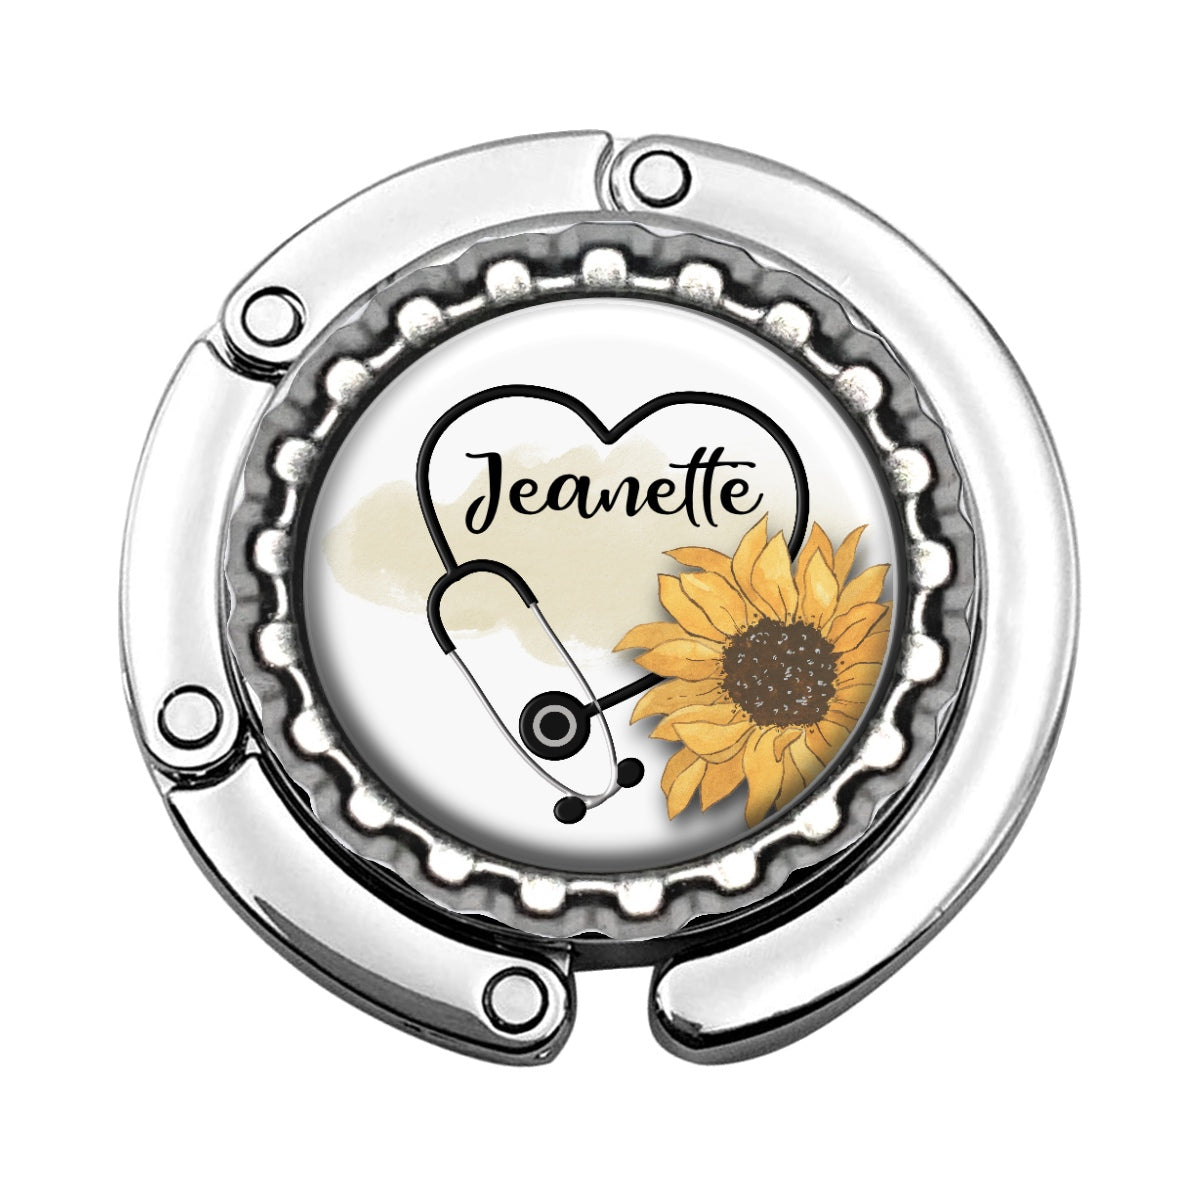 a badge with a stethoscope and a sunflower